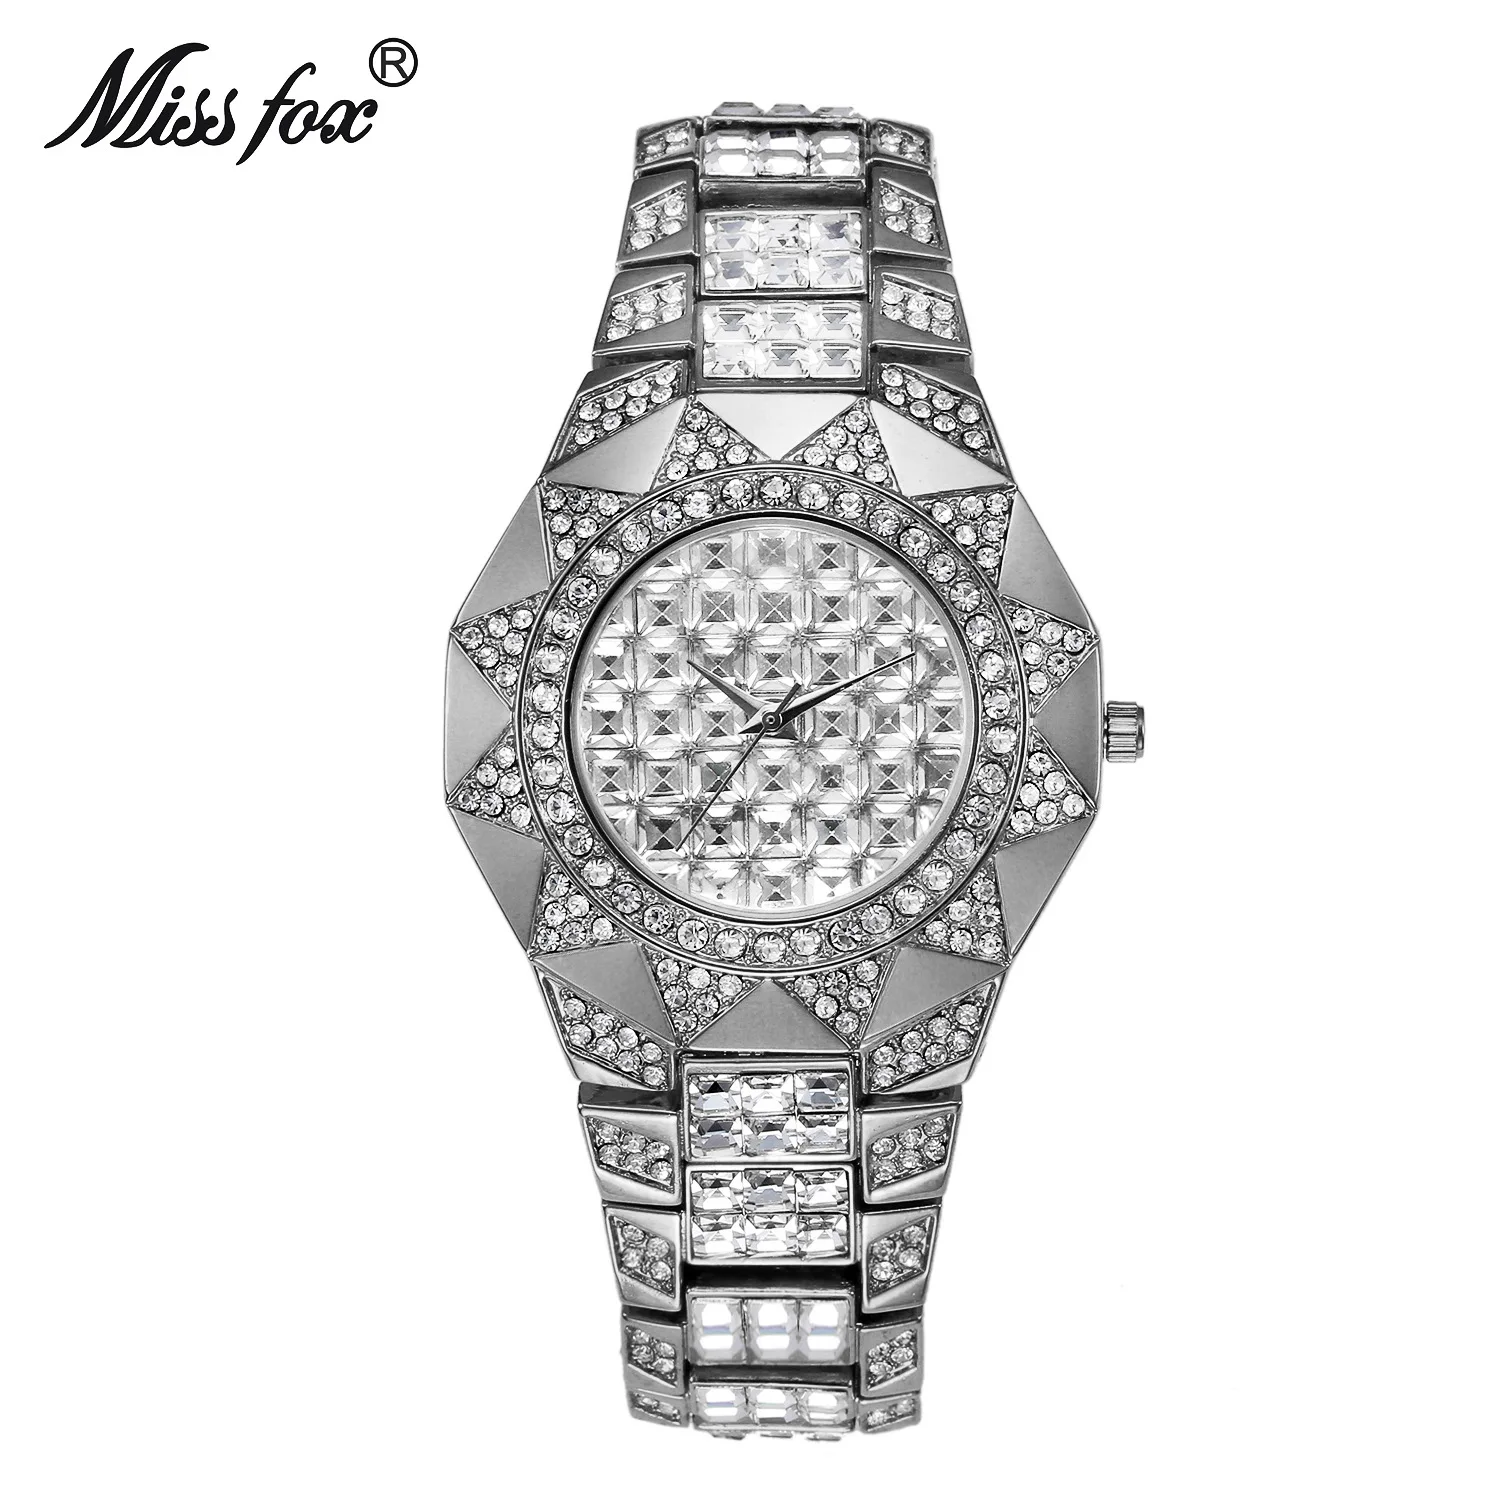 

2022Happy happy missfox hot style of foreign trade the waterproof set auger drill high-grade diamond British female watches